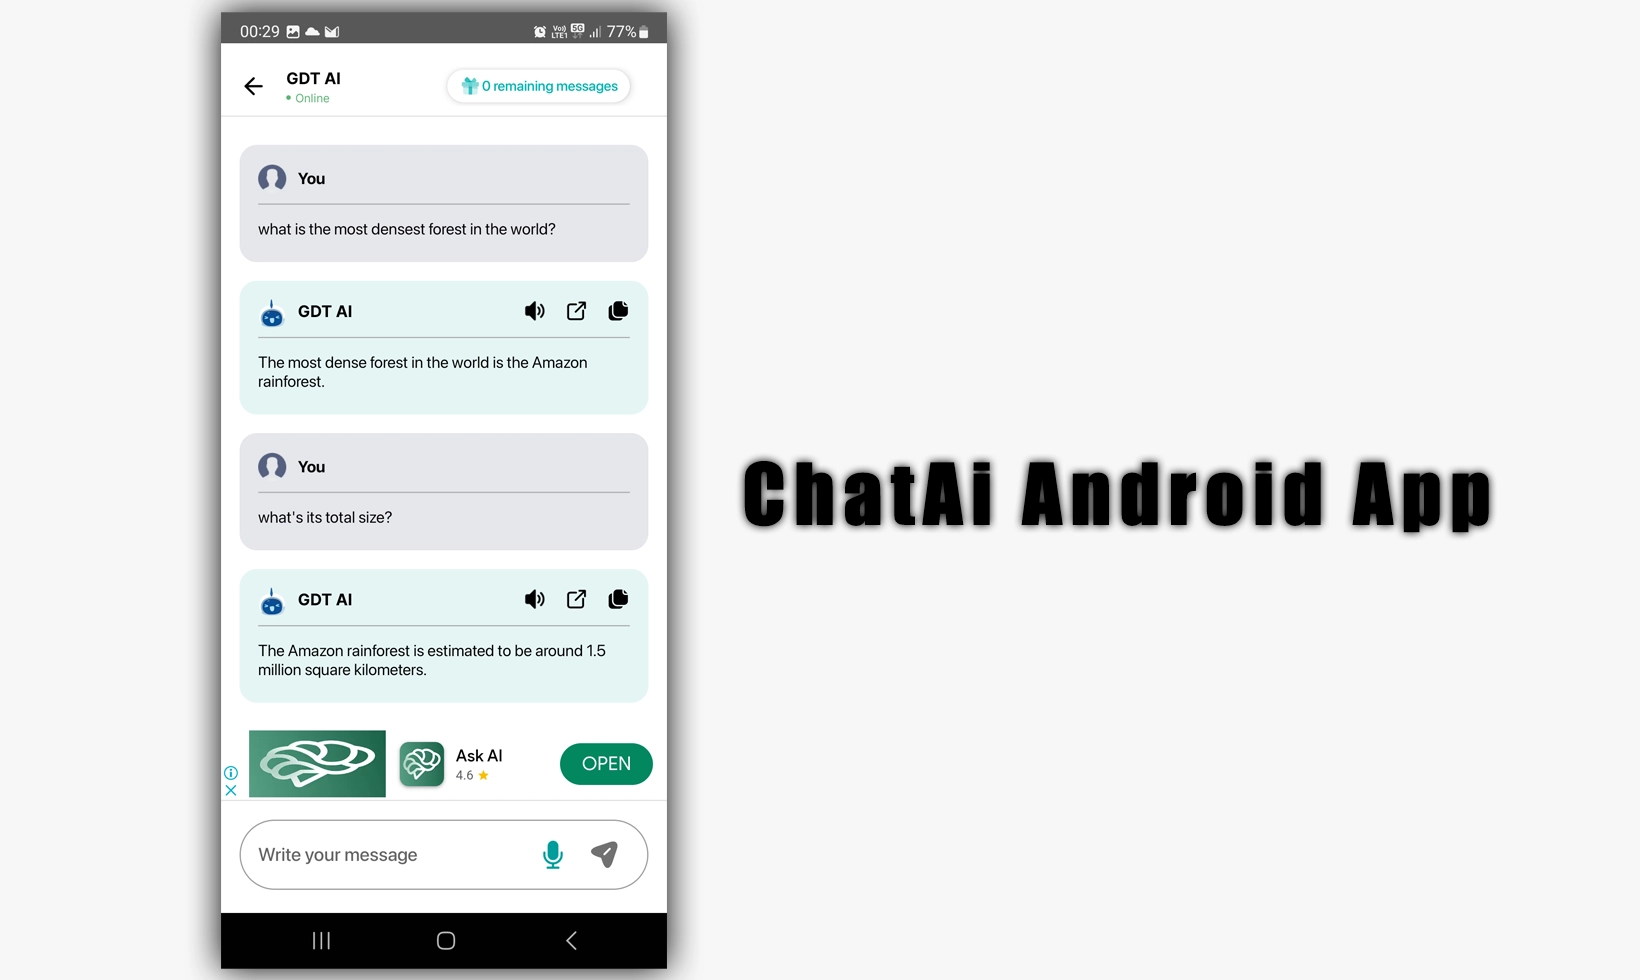 ChatAi Android App